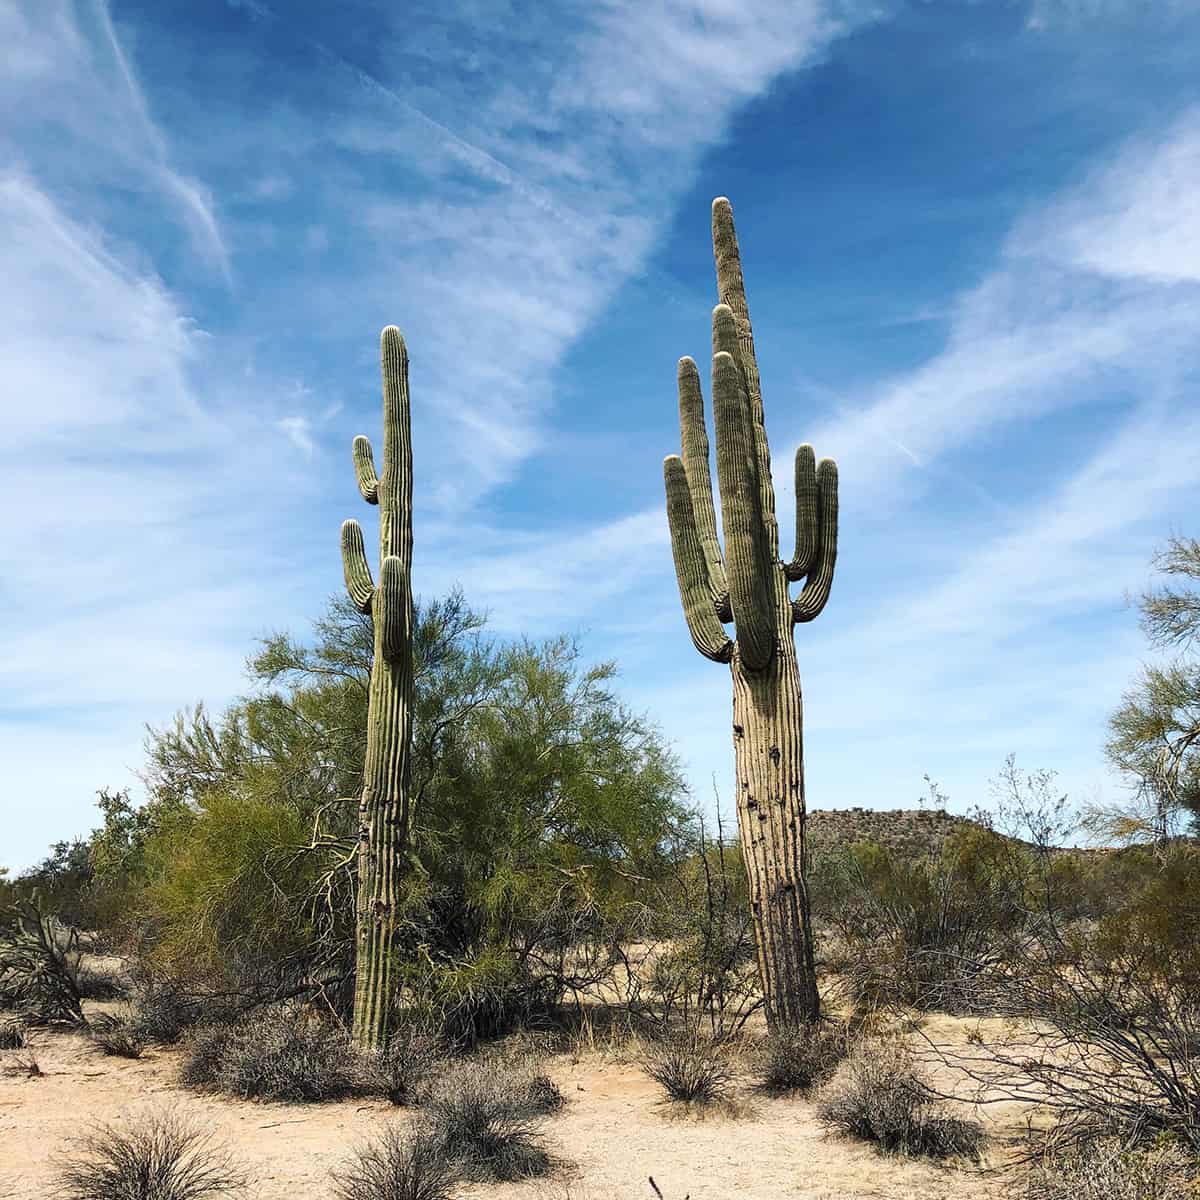 North Trail Self Guided Tour in McDowell Mountain Regional Park, Arizona